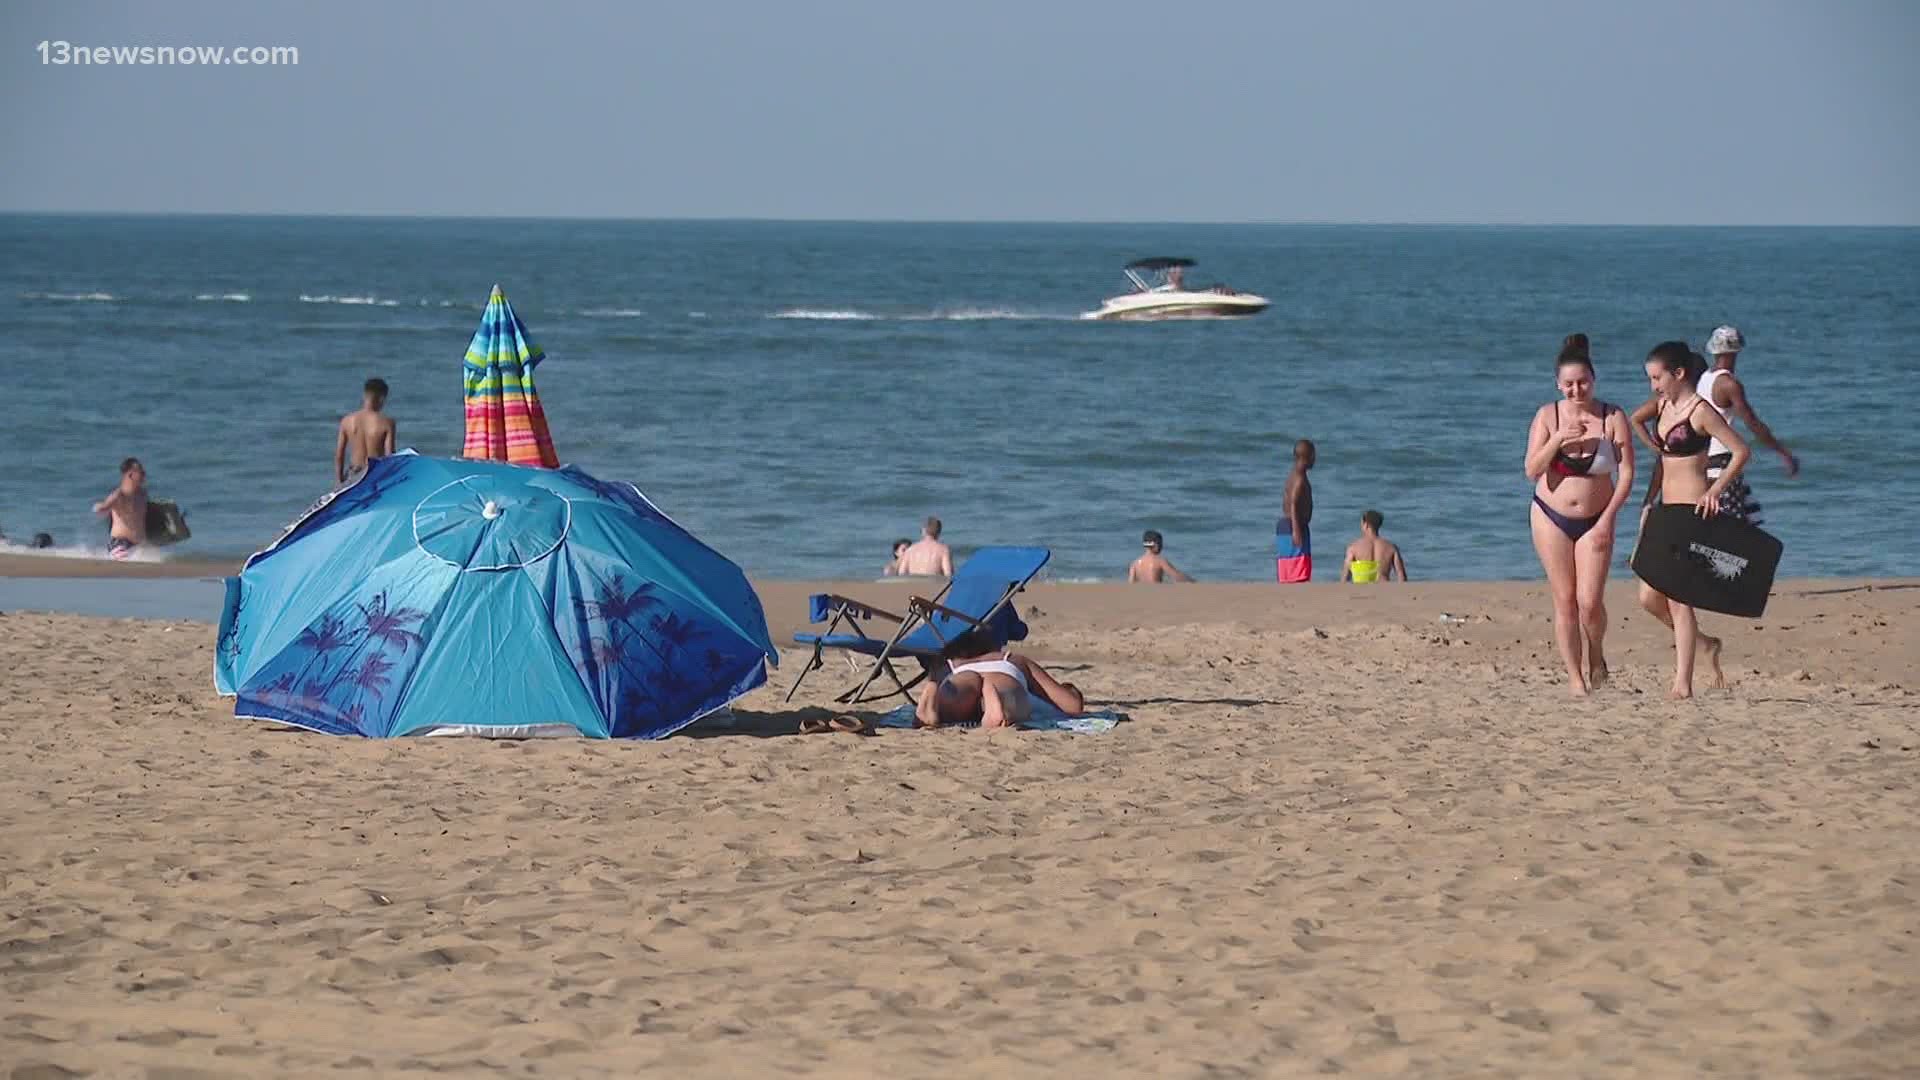 The Virginia Beach Department of Public Health is seeing an increase in positive COVID-19 cases.